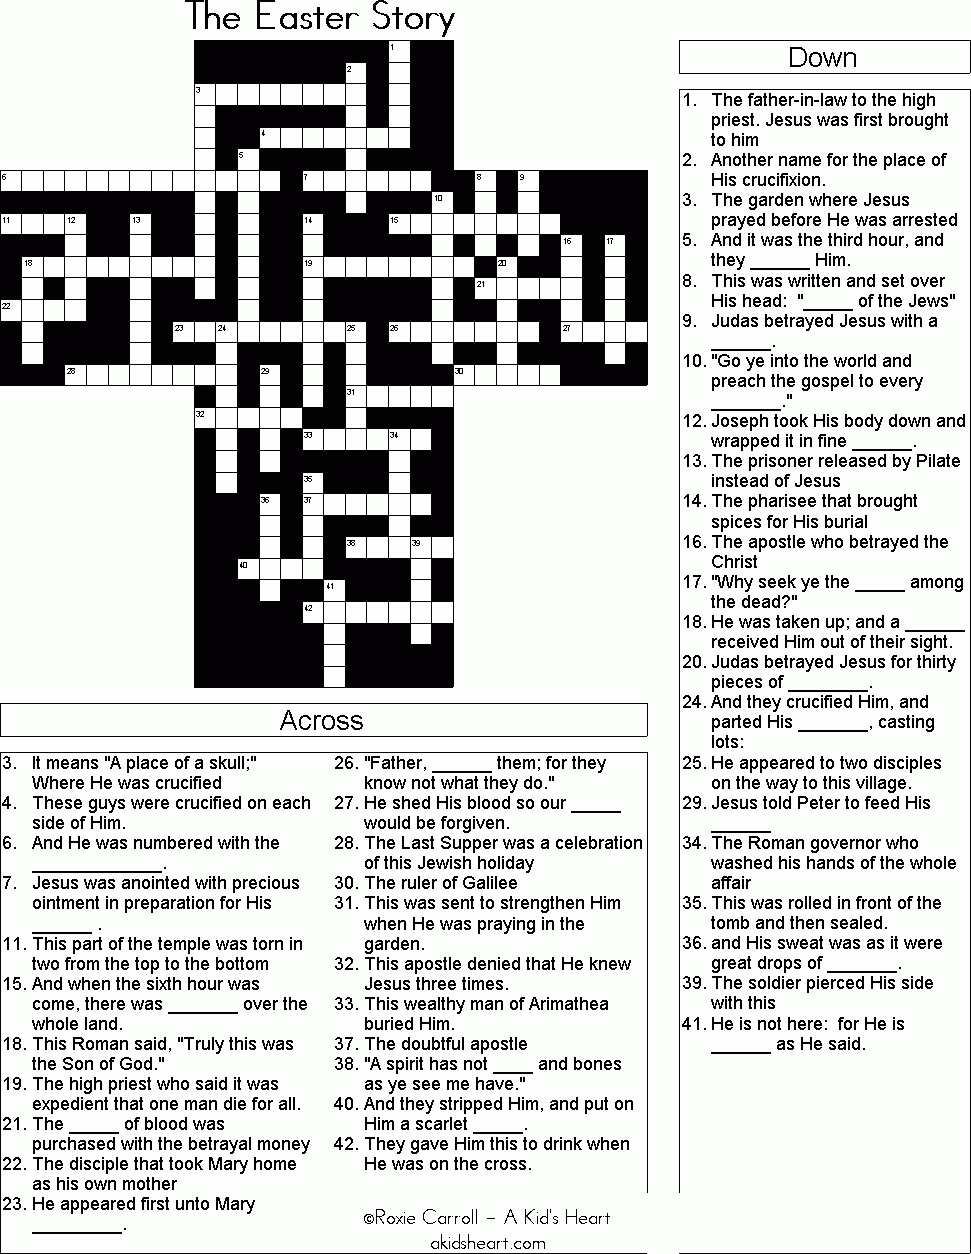 The Easter Story Crossword Puzzle | Bible Crosswords/word Search - Printable Bible Crossword Puzzles For Youth